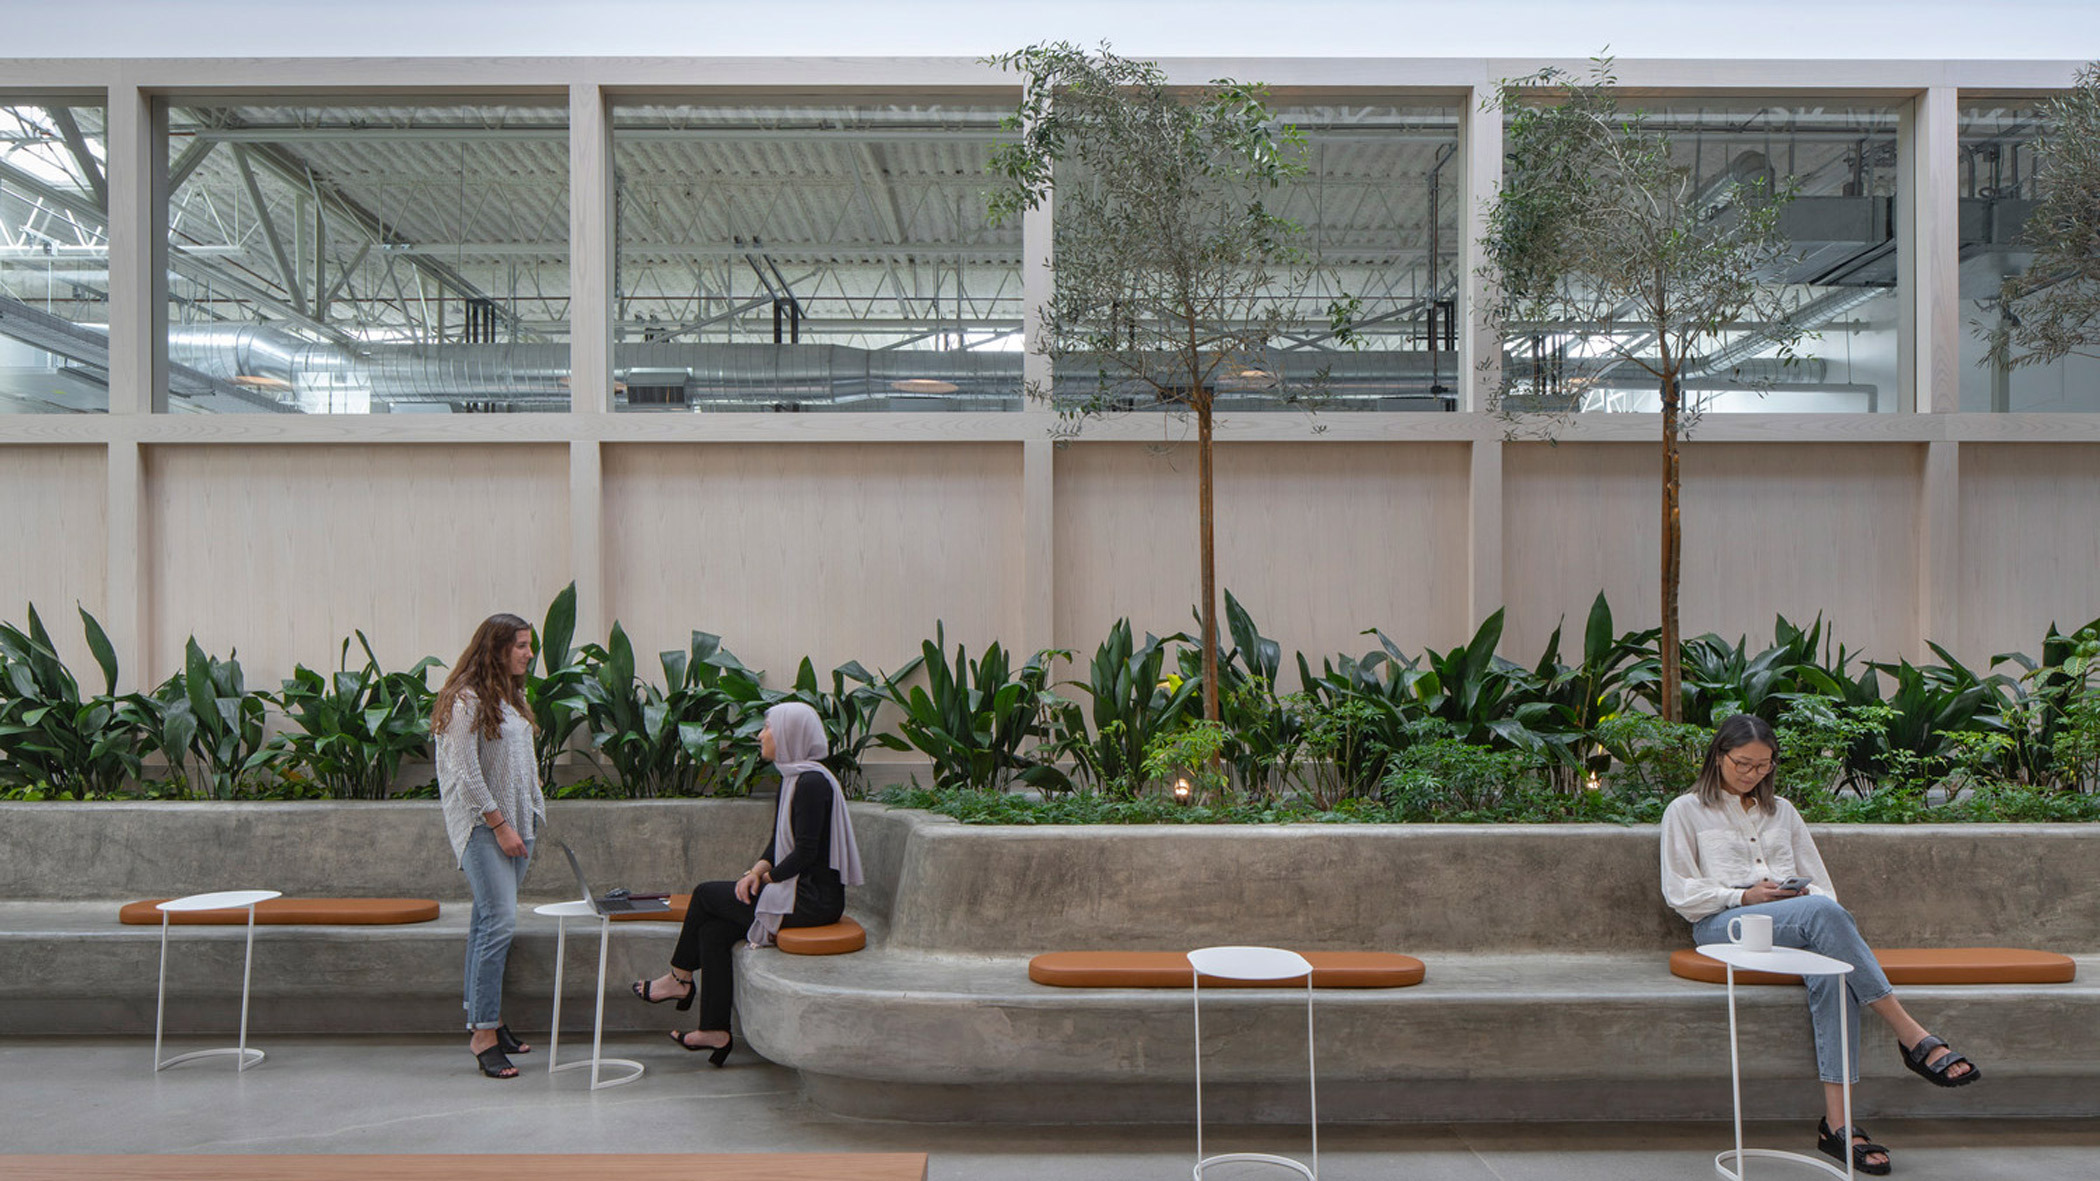 Spacious lobby with a biophilic design featuring an indoor garden bed, wooden paneling, and a skylight. Modern benches and side tables accommodate visitors amid the lush greenery, combining functionality with a connection to nature.